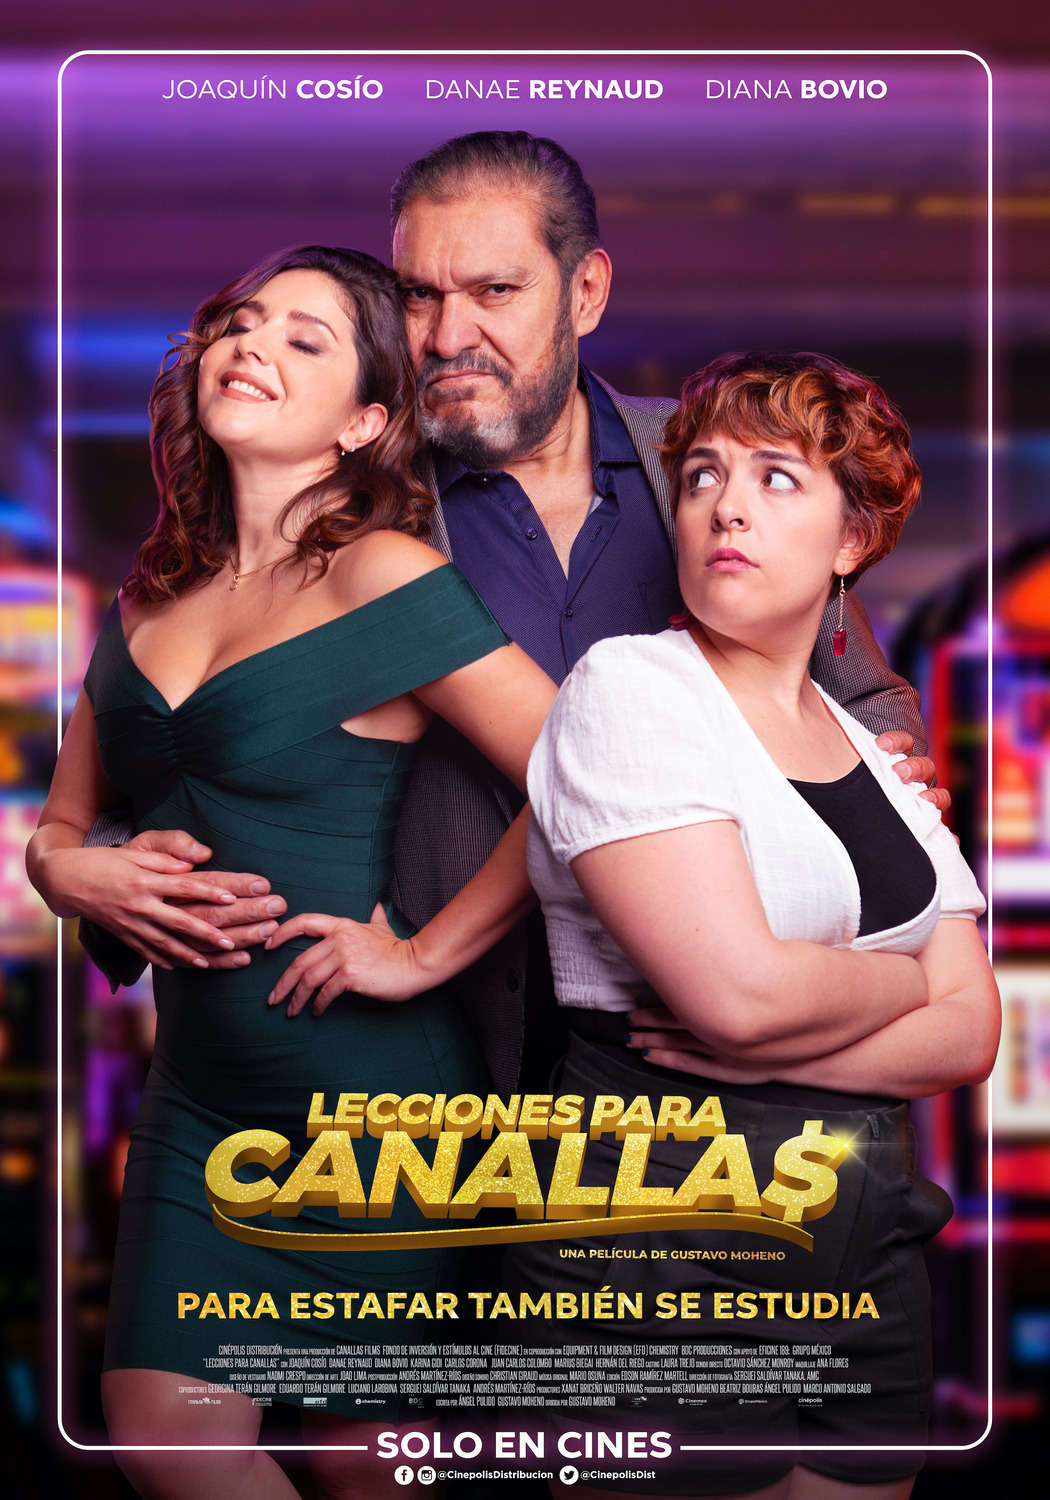 Extra Large Movie Poster Image for Lecciones para canallas 